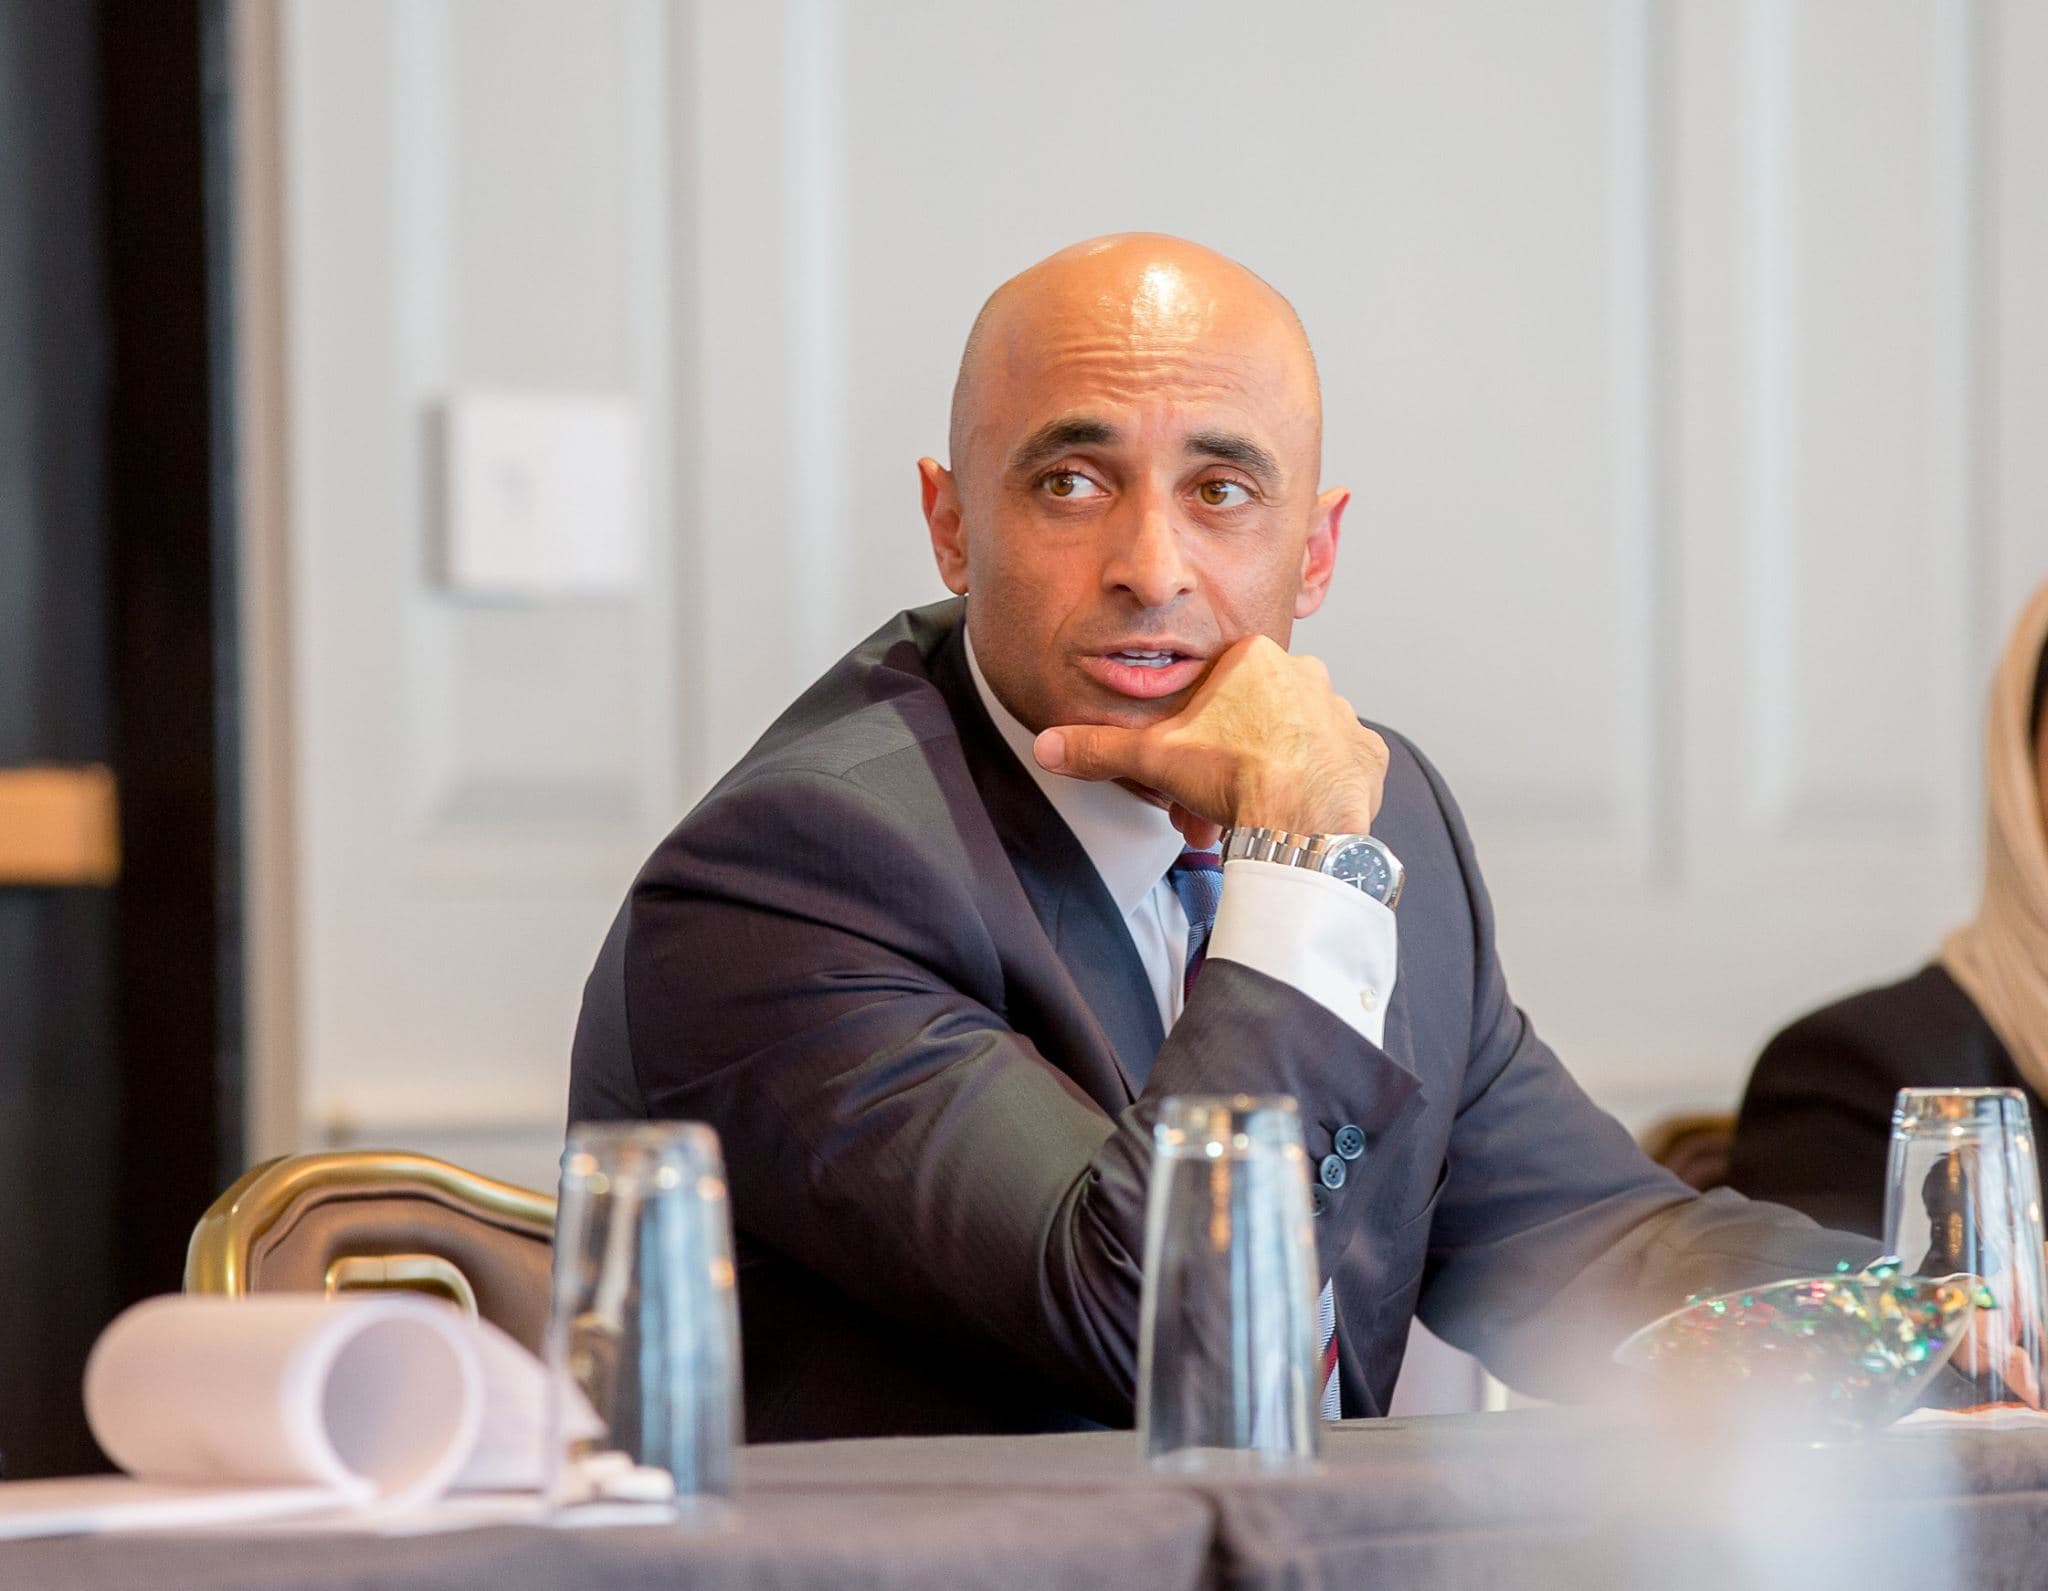  United Arab Emirates Ambassador to the United States Yousef Al Otaiba discusses building economic relations with the US with Frank Kane at The National: http://www.thenational.ae/business/economy/interview-uae-ambassador-to-washington-on-building-economic-relations-with-us#full